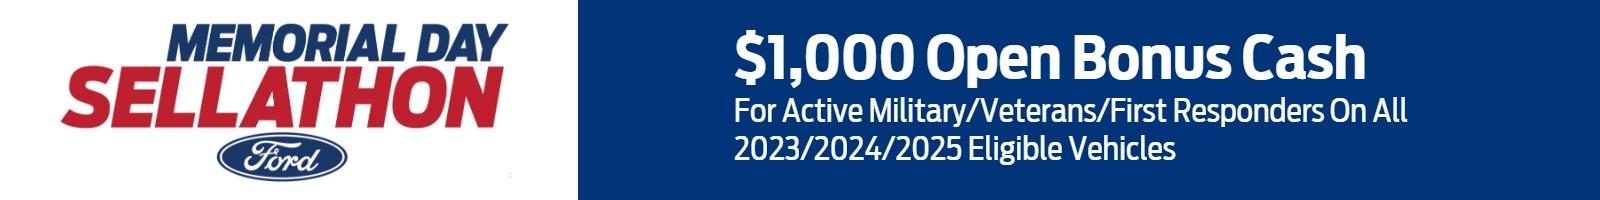 $1,000 Open Bonus Cash for Active Military/Veterans/First Responders - ꟷ On All 2023/2024/2025 Eligible Vehicles | Banner